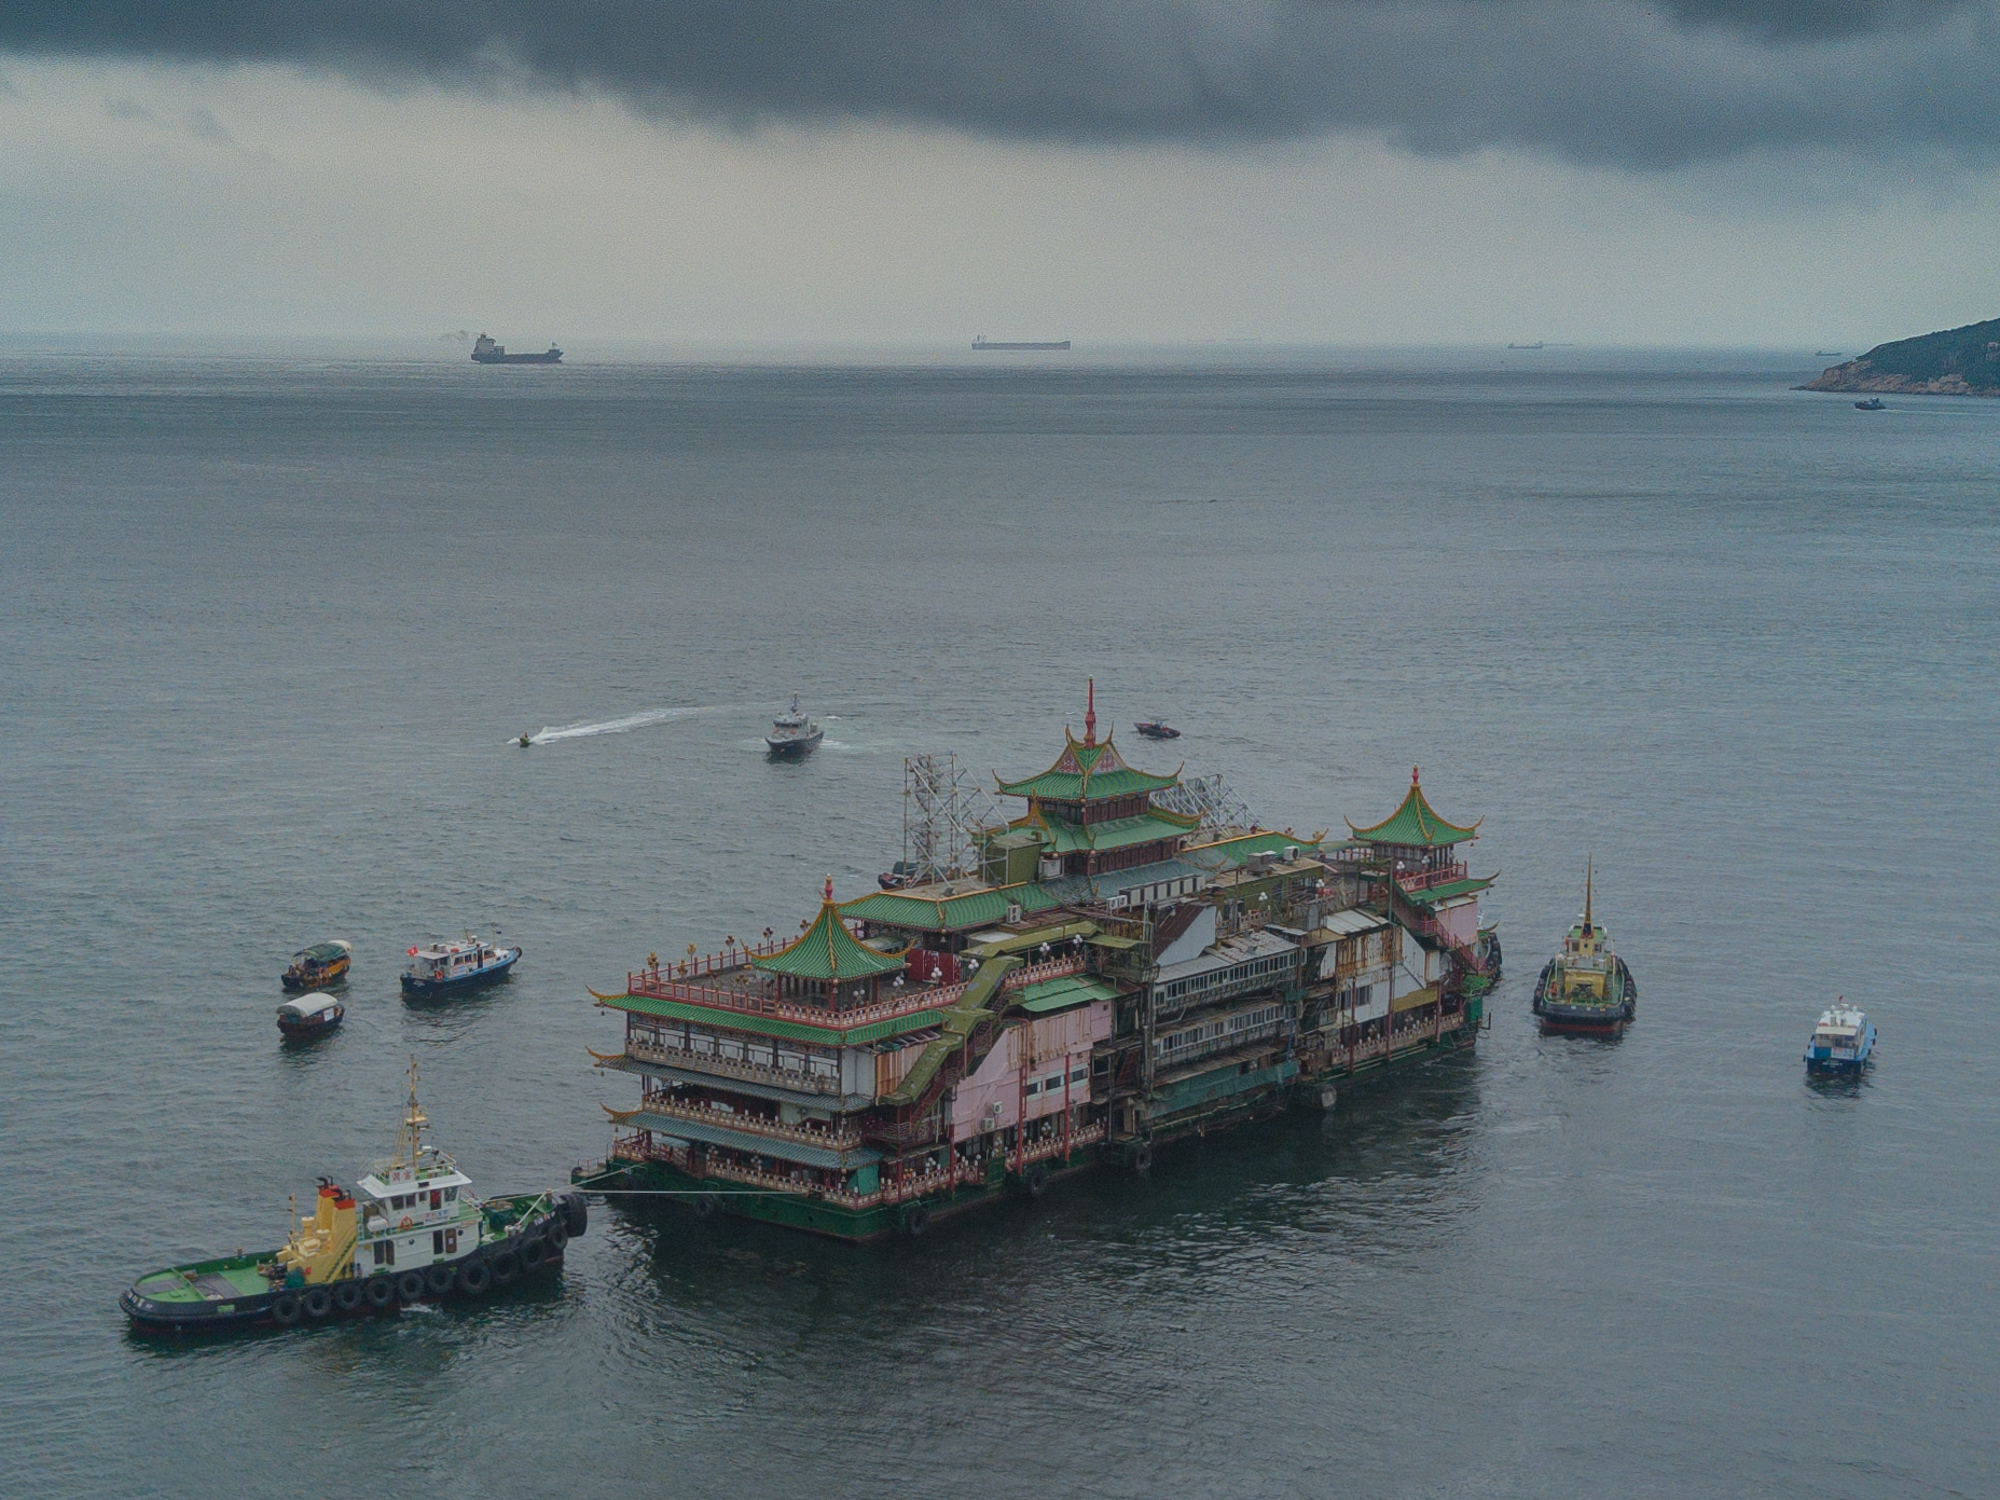 Jumbo Floating Restaurant, a famous Hong Kong landmark, was towed out of Aberdeen Harbor on June 14, 2022. It later capsized in waters near the Paracel Islands in the South China Sea.